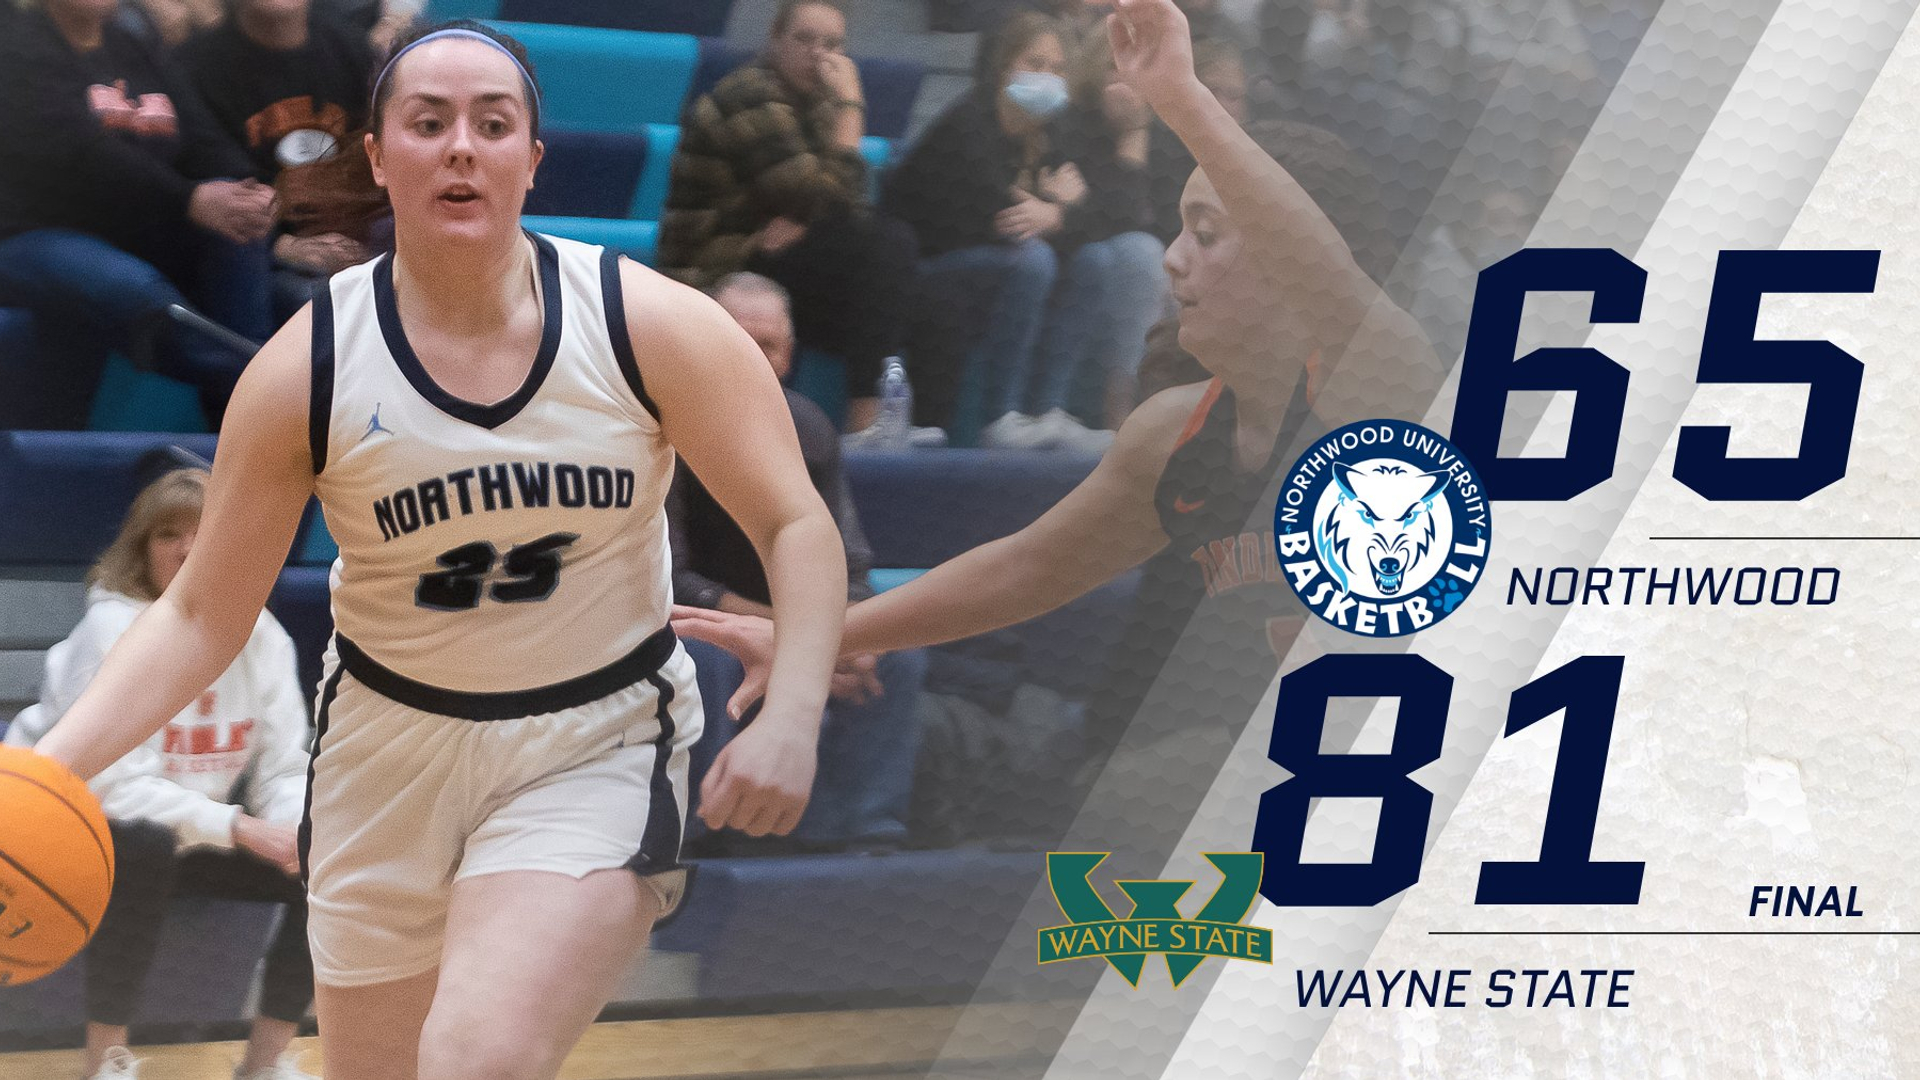 Women's Basketball Win Streak Ends With 81-65 Loss To Wayne State